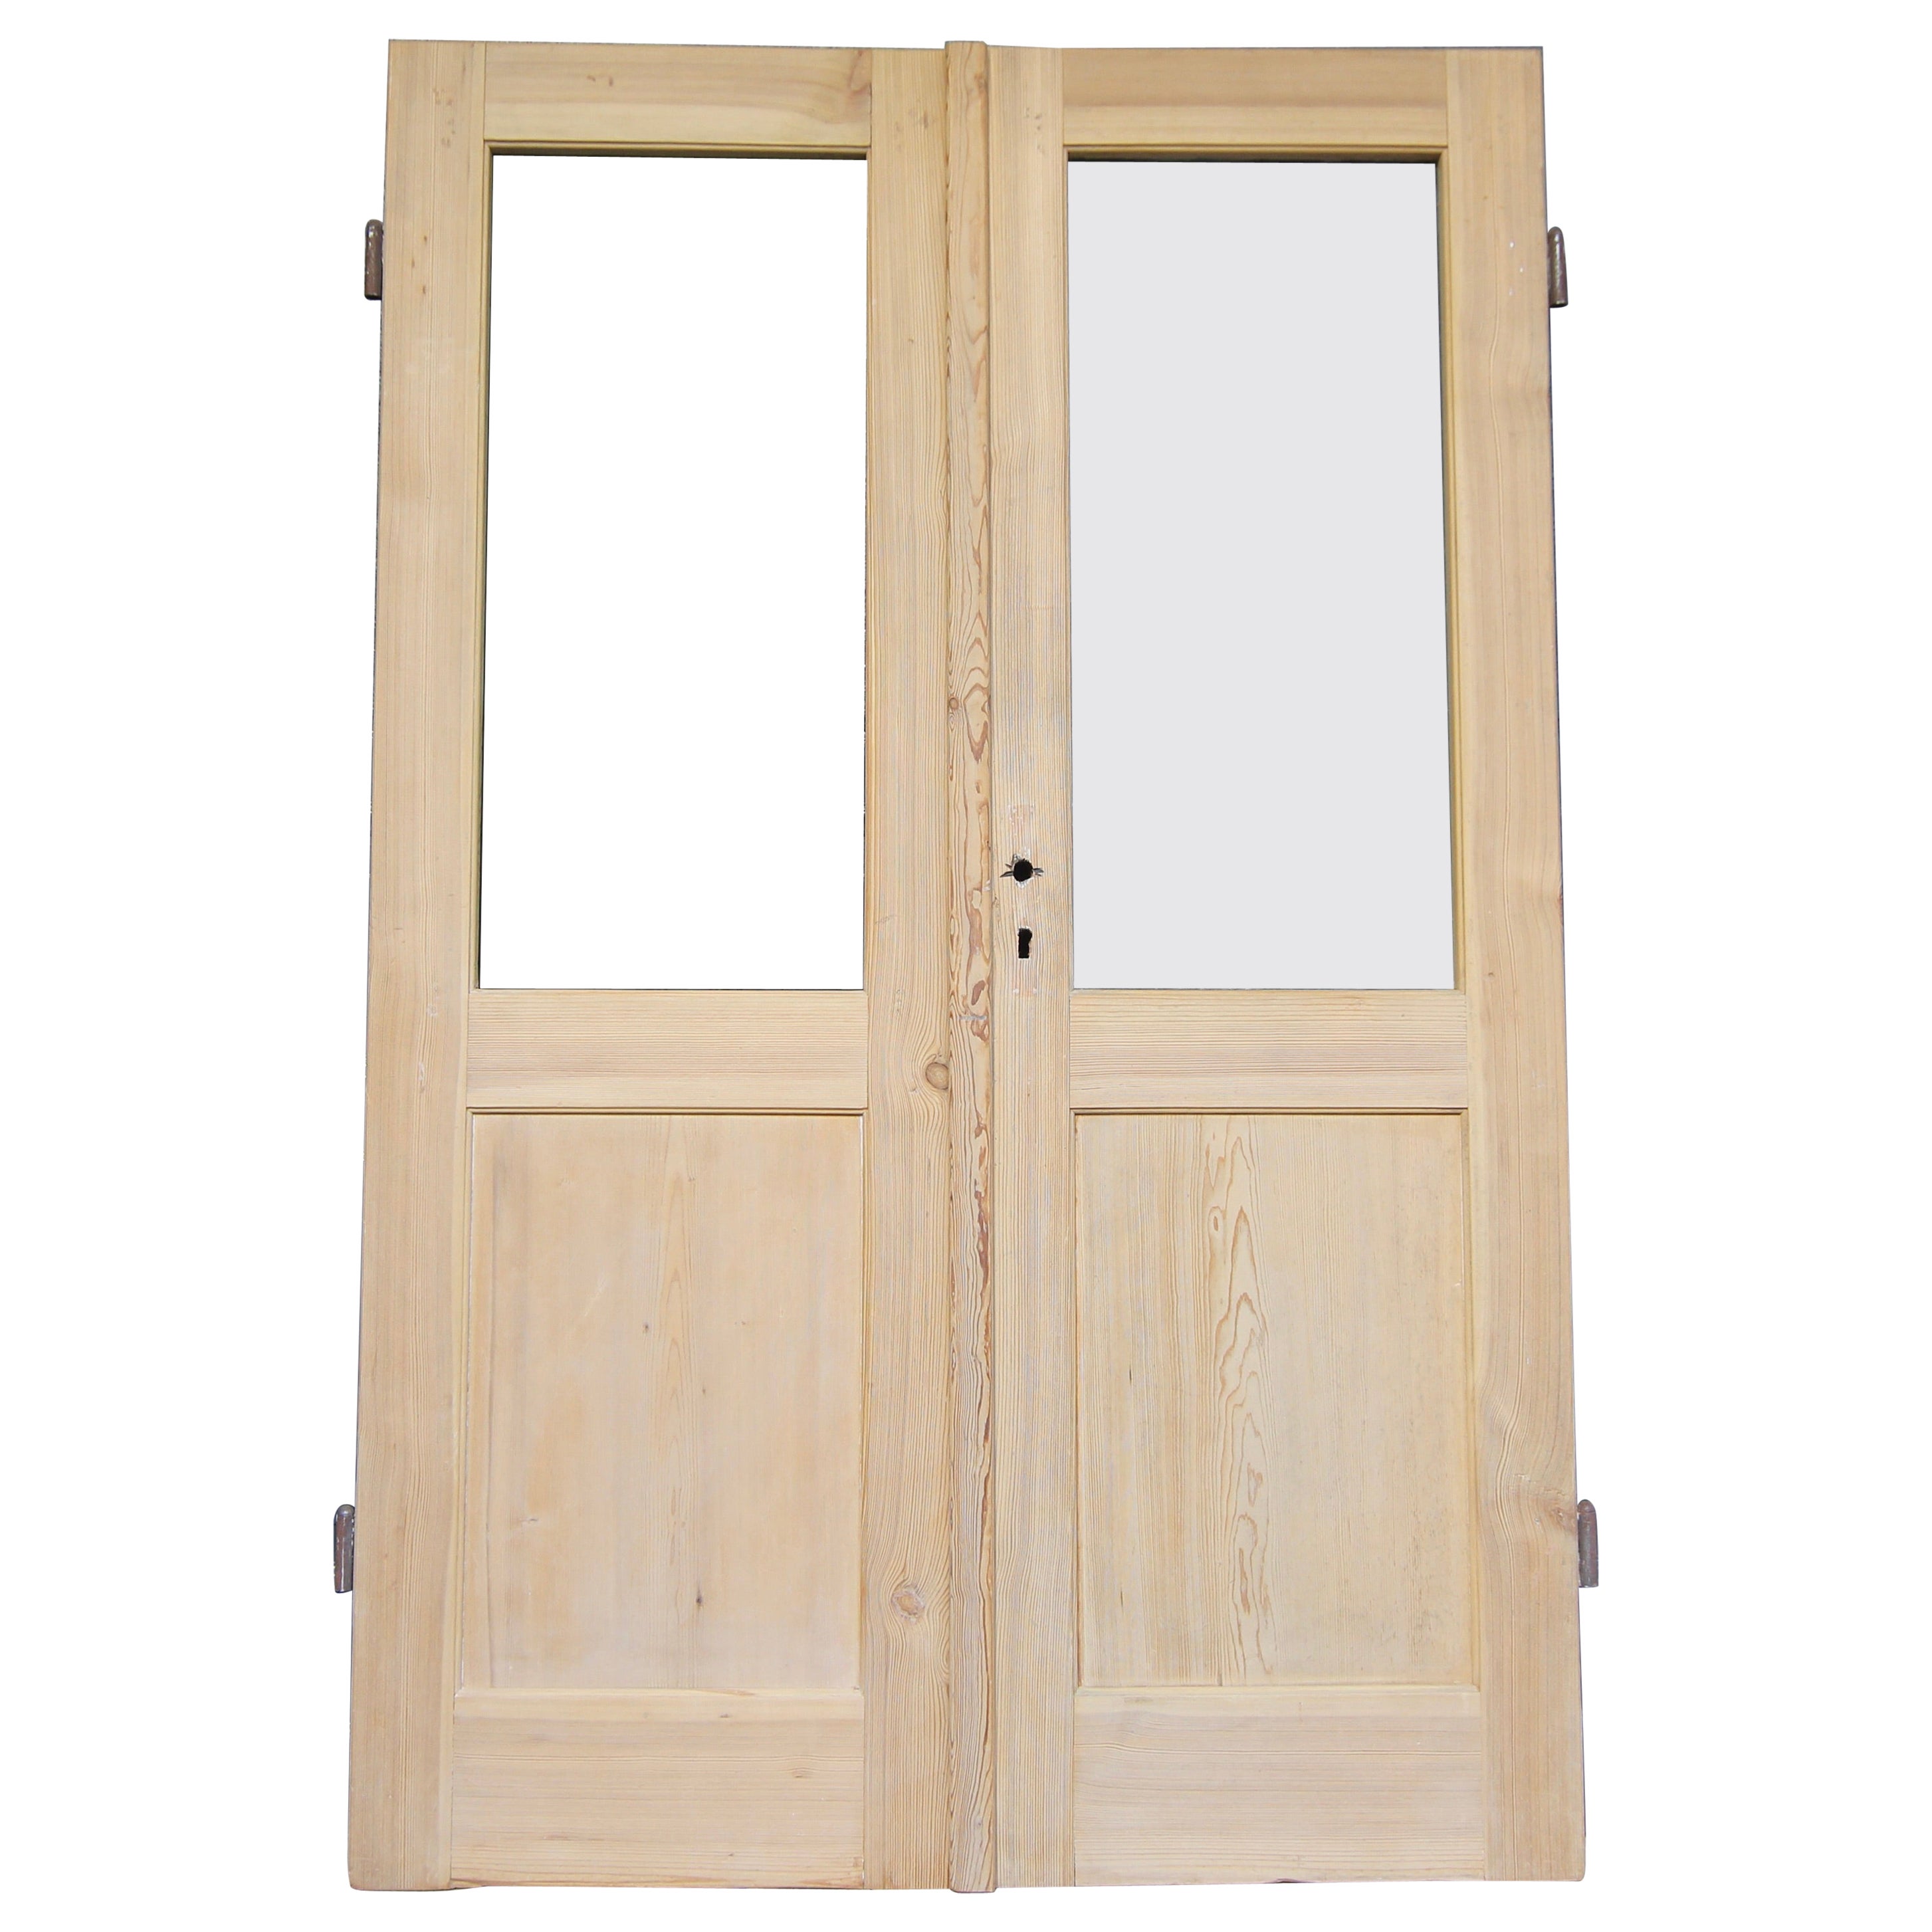 Early 20th Century Double Door made of Pine For Sale